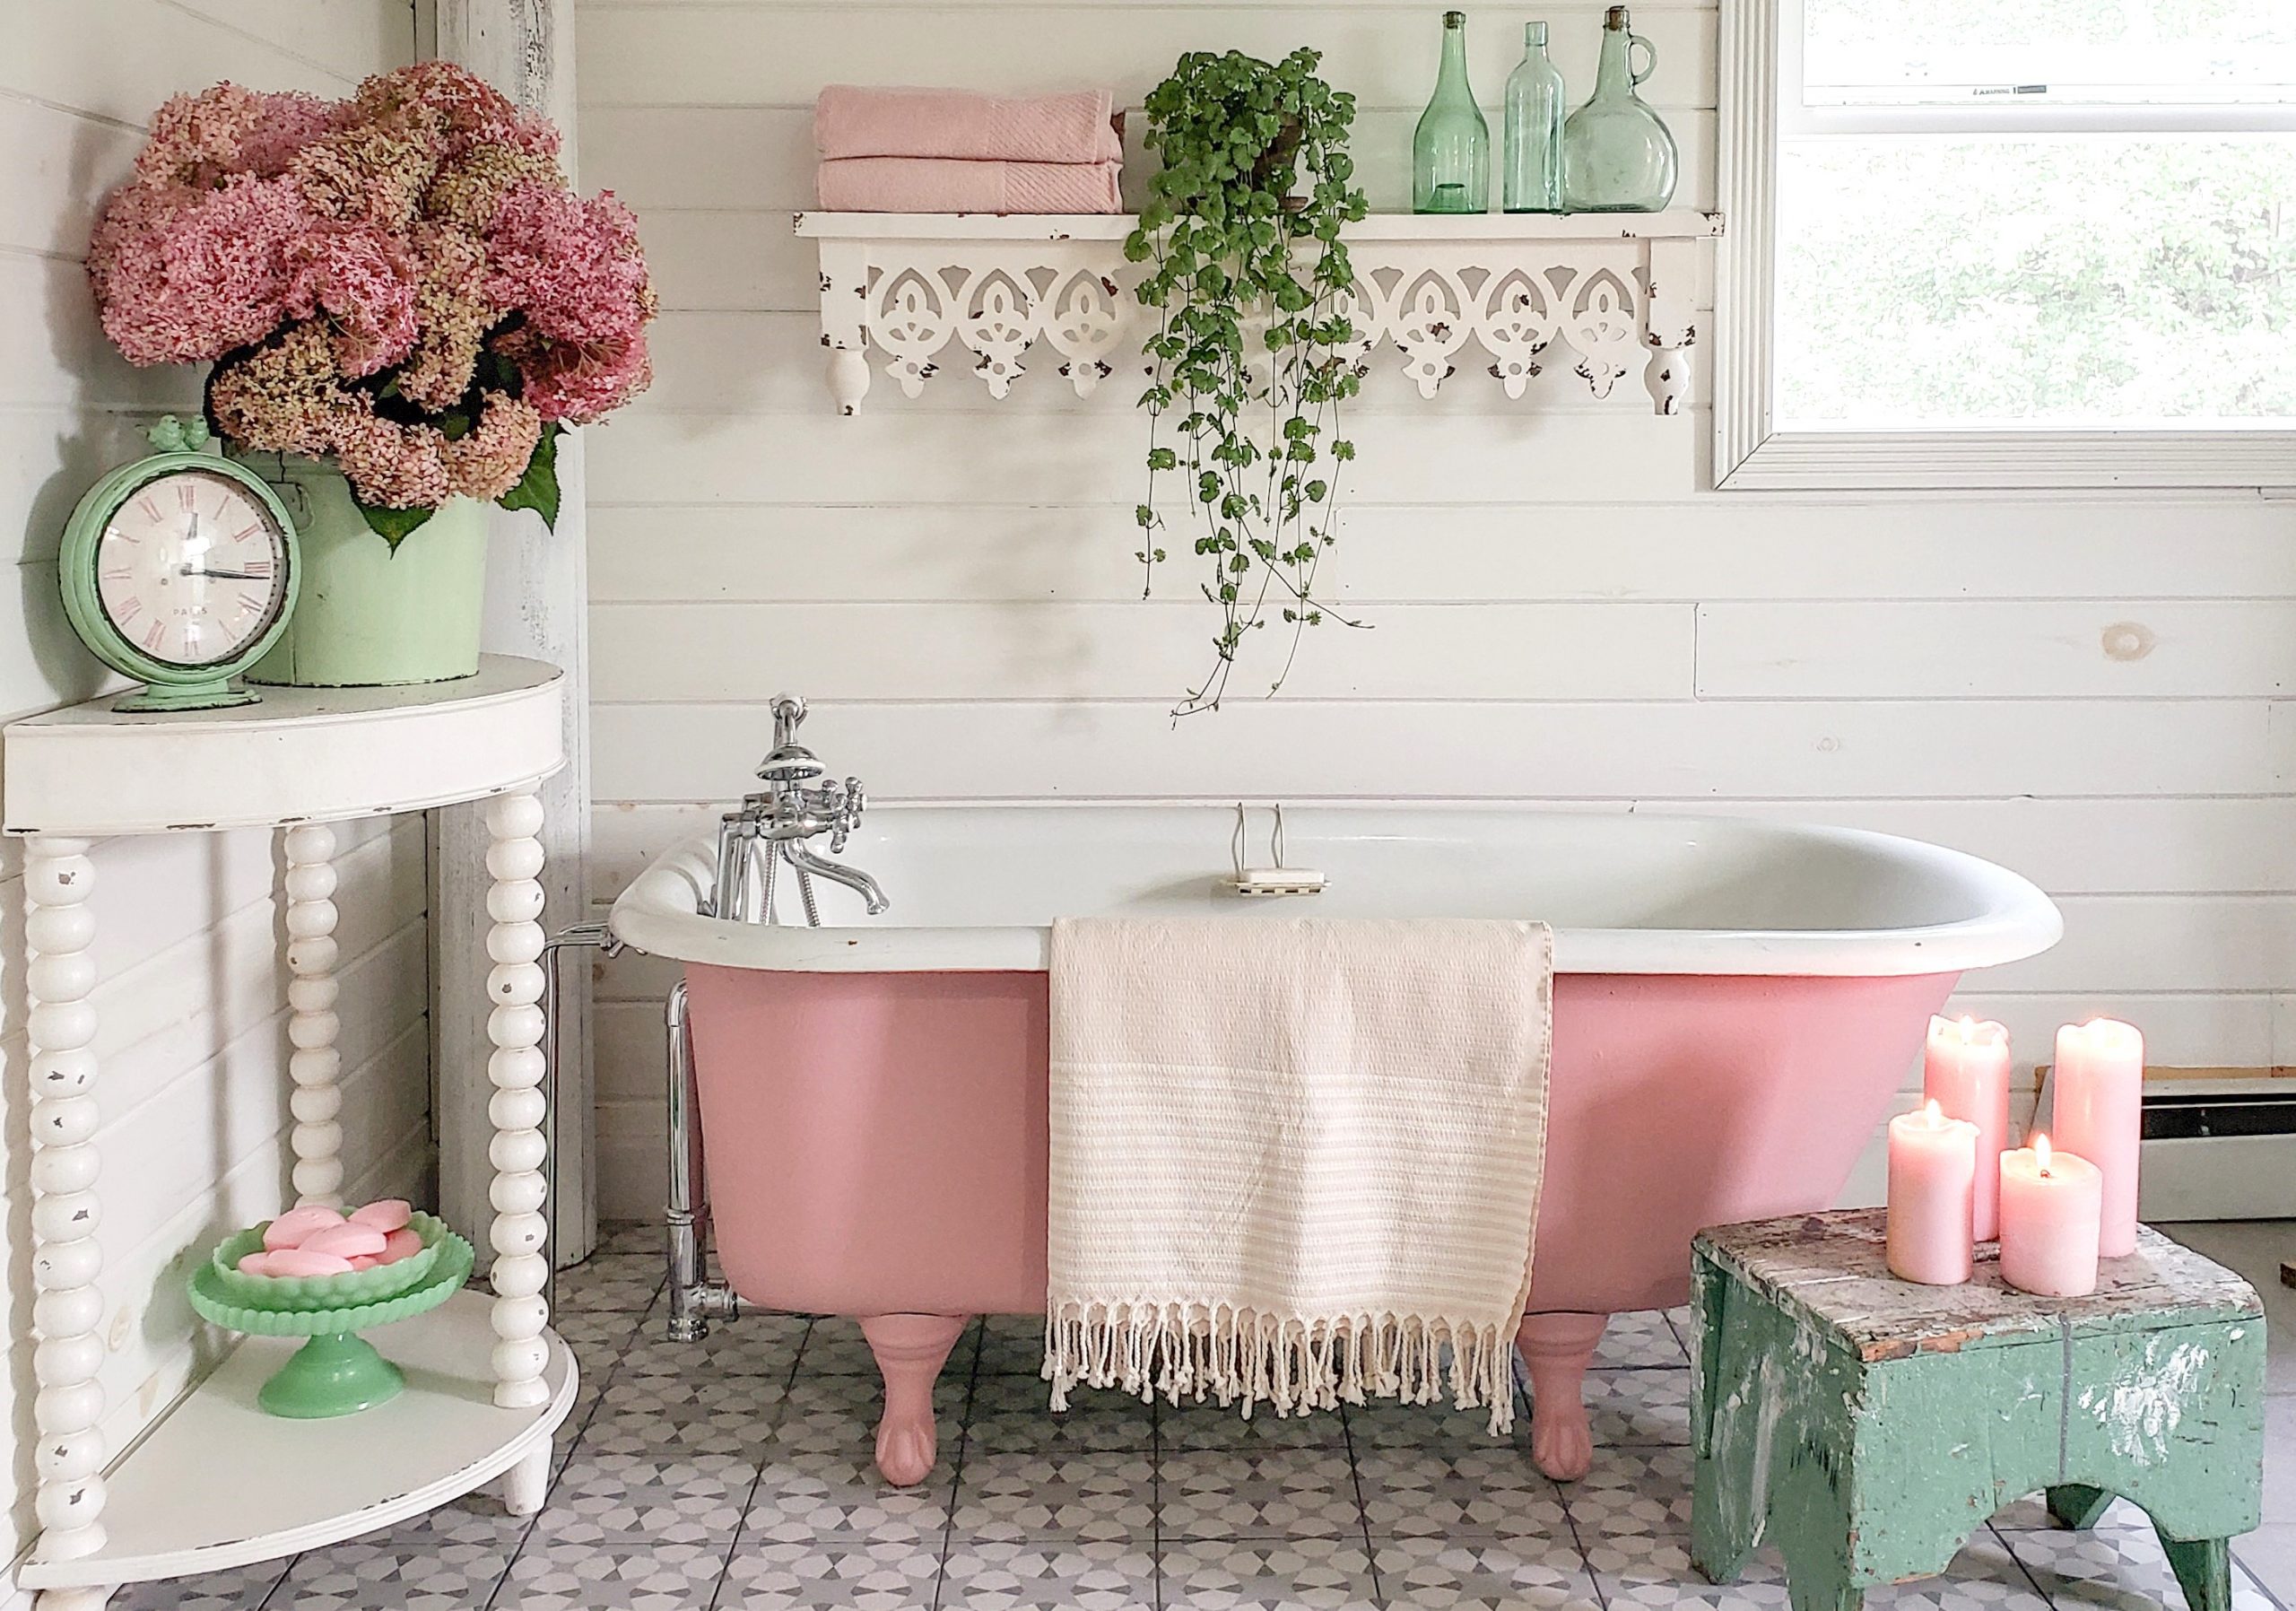 Don’t sweat the small spaces – Explore the best ways to decorate your farmhouse bathroom